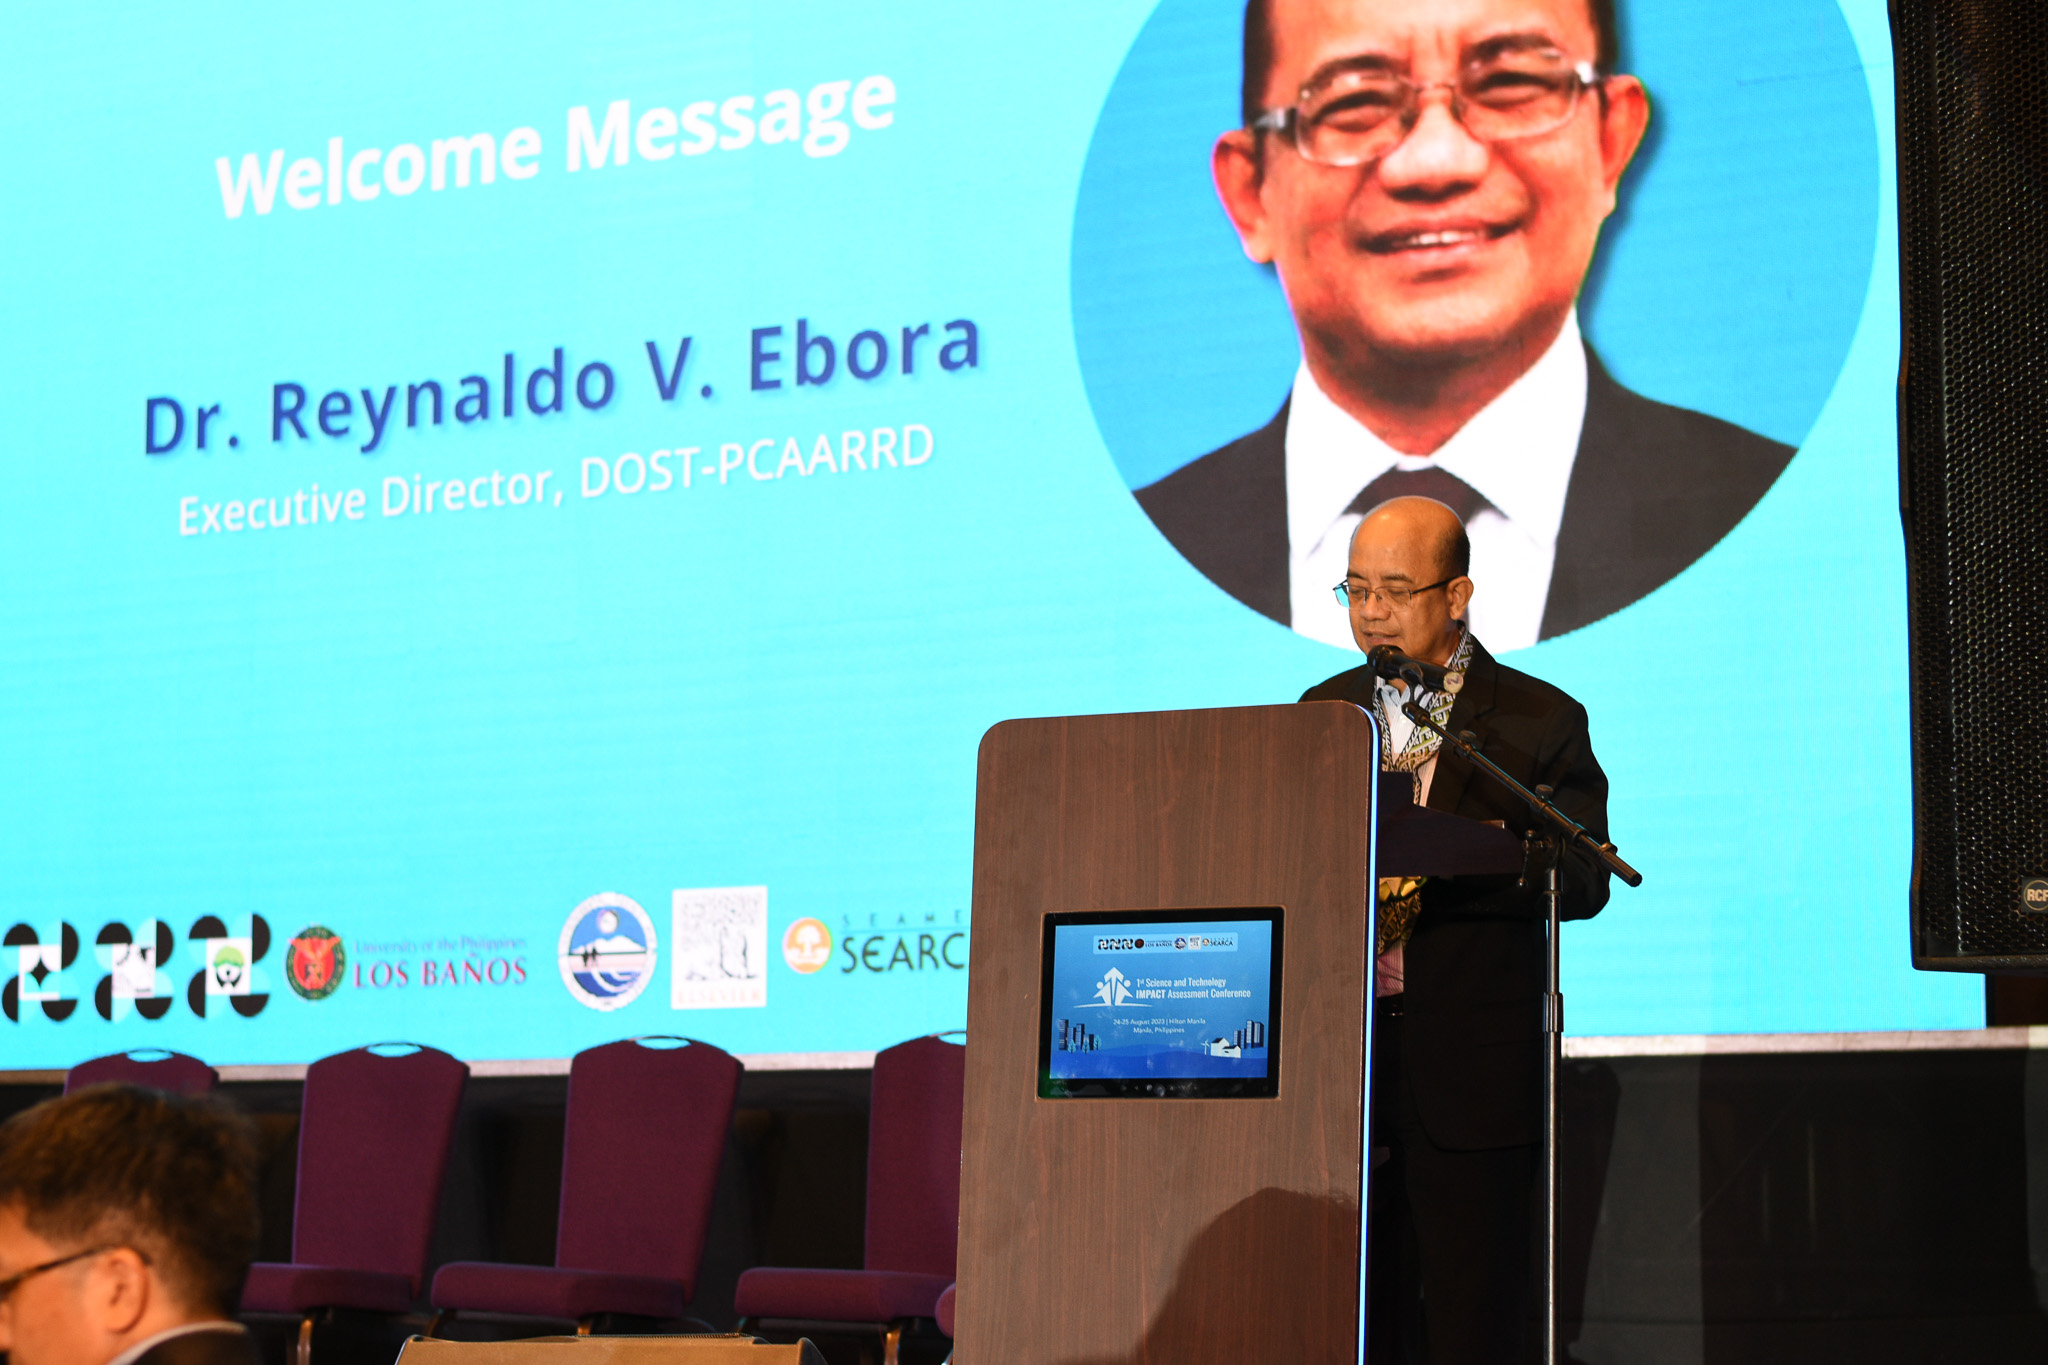 DOST-PCAARRD Executive Director Reynaldo V. Ebora shares his welcoming remarks for the 1st Science and Technology Impact Assessment Conference. In his speech, Dr. Ebora reiterated the importance of doing impact assessment in the field of research and development to optimize the benefits of R&amp;D to stakeholders.